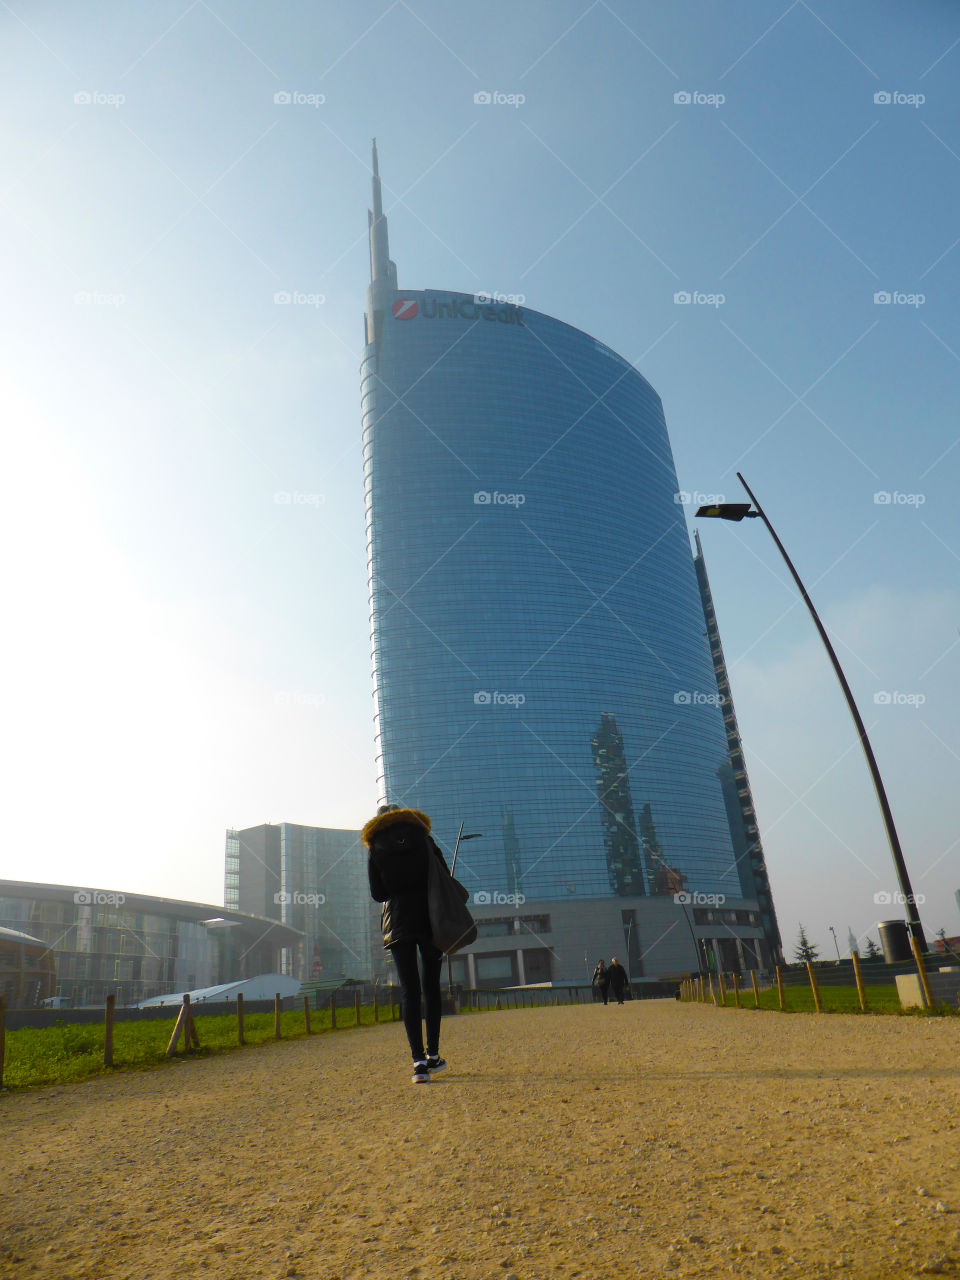 A person is Walking in the park near the Unicredit skyscraper in Milan